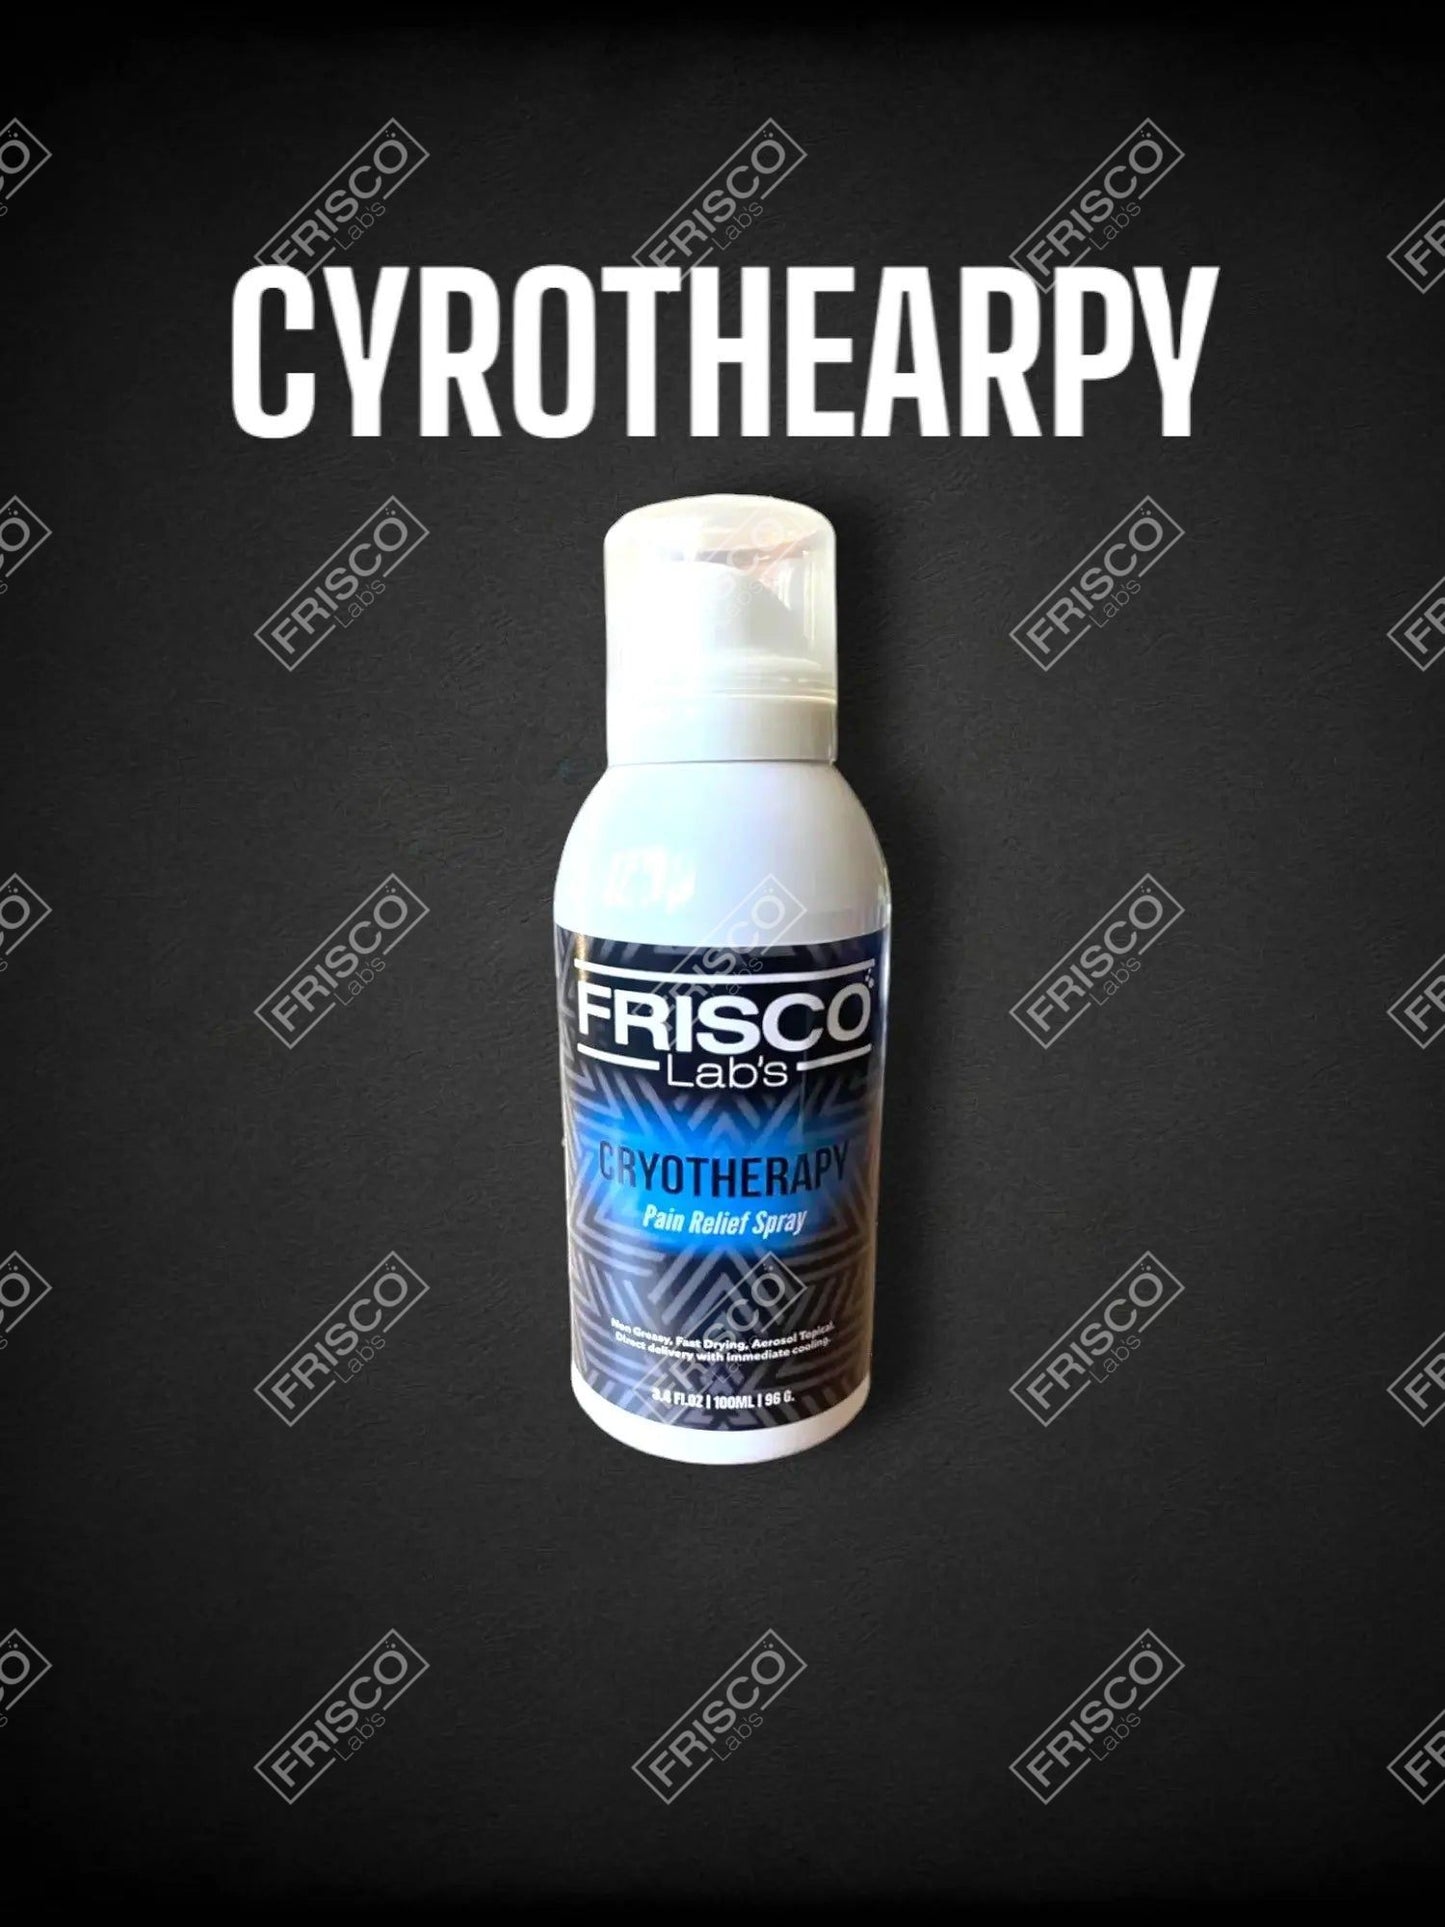 Cryotherapy Pain Relif Spray Frisco Labs